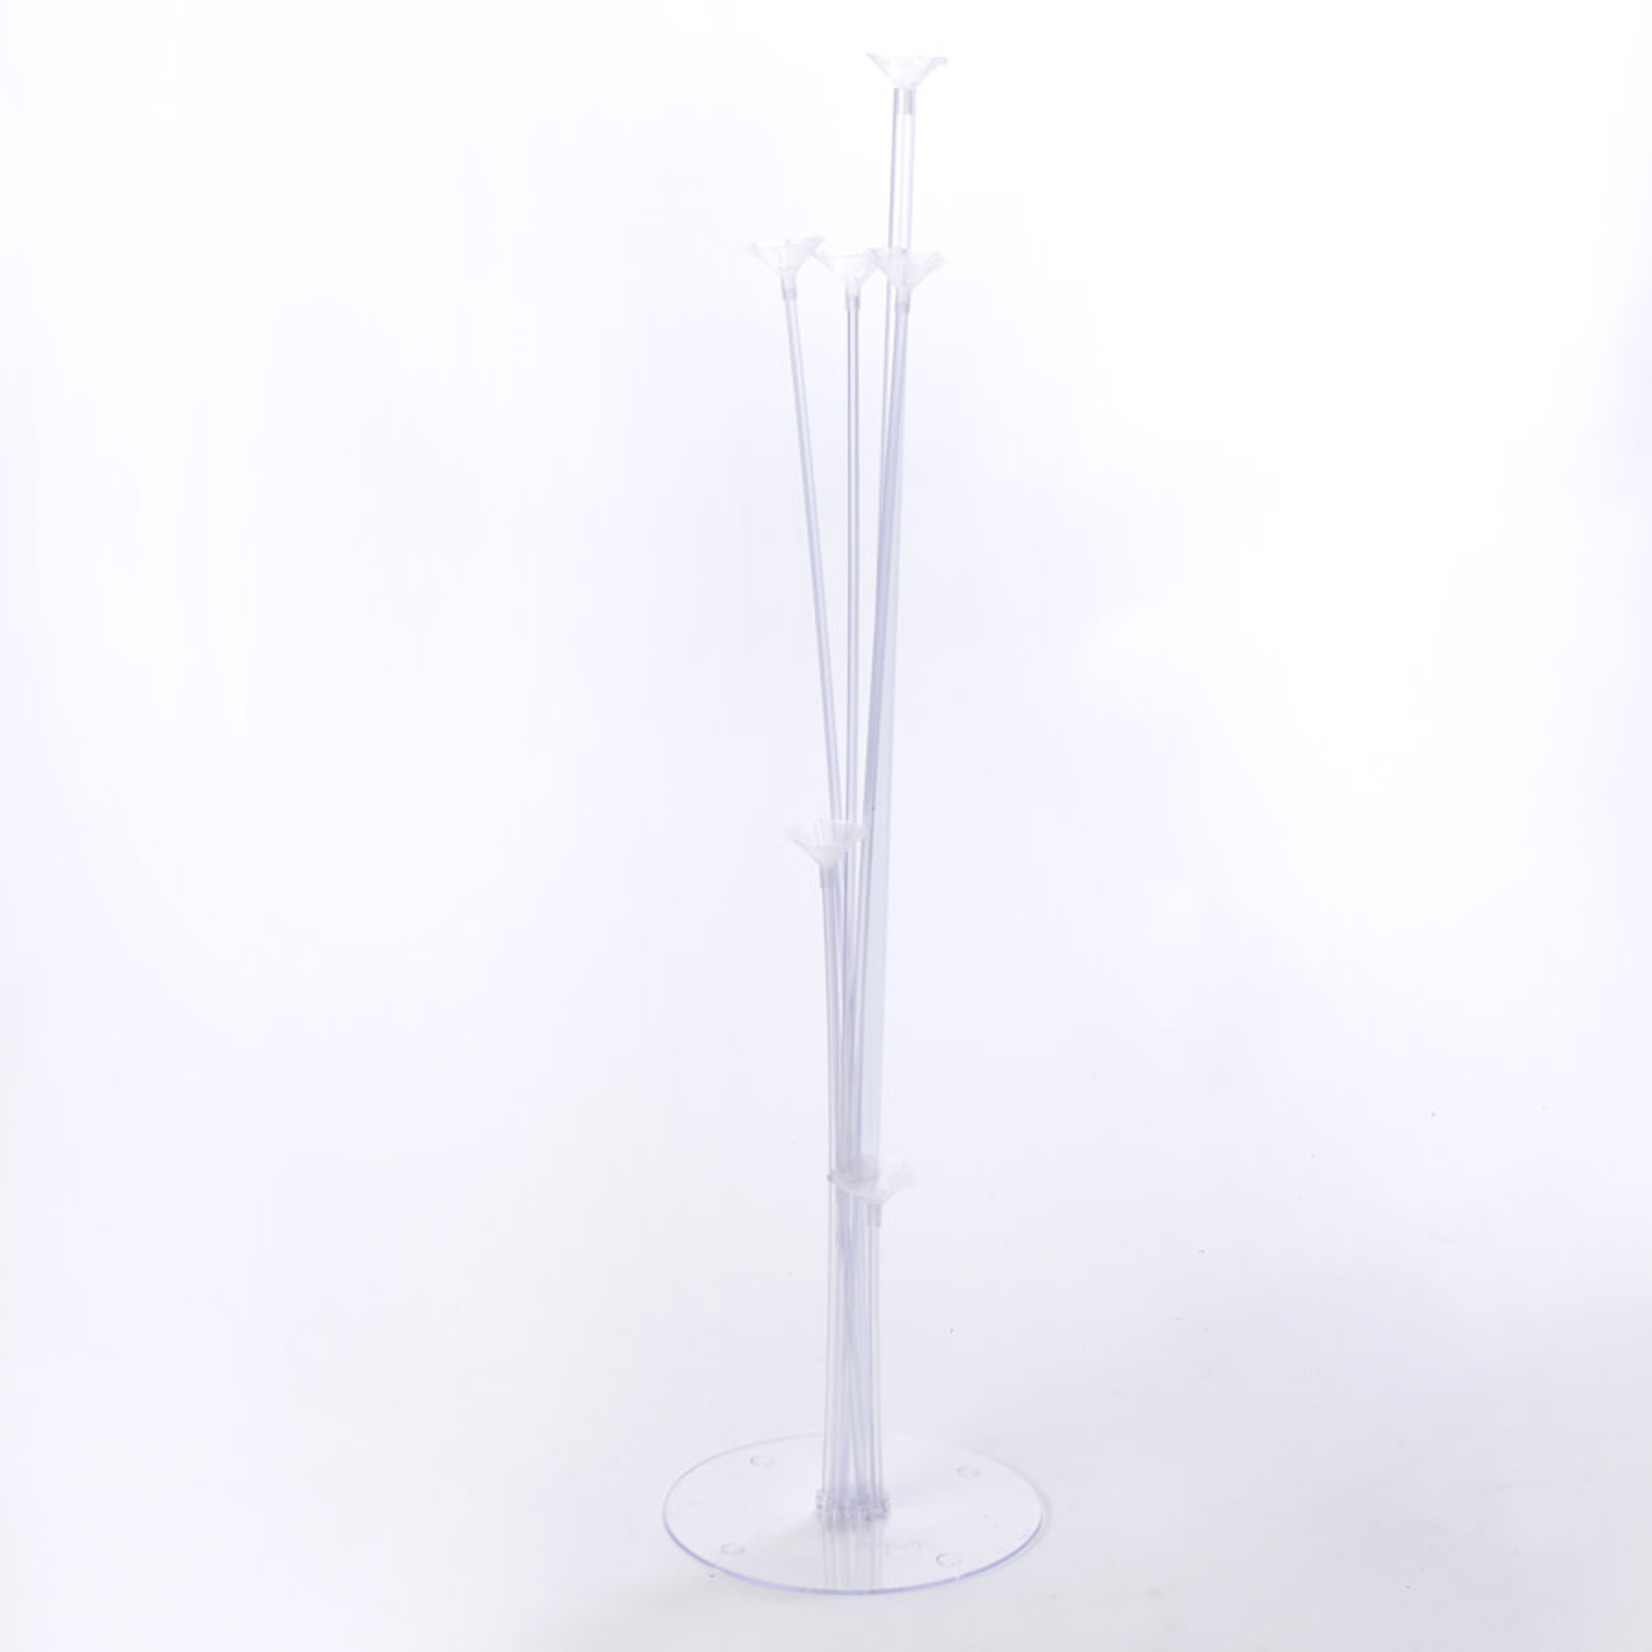 26.25" X 6.75" TABLE TOP BALLOON STAND